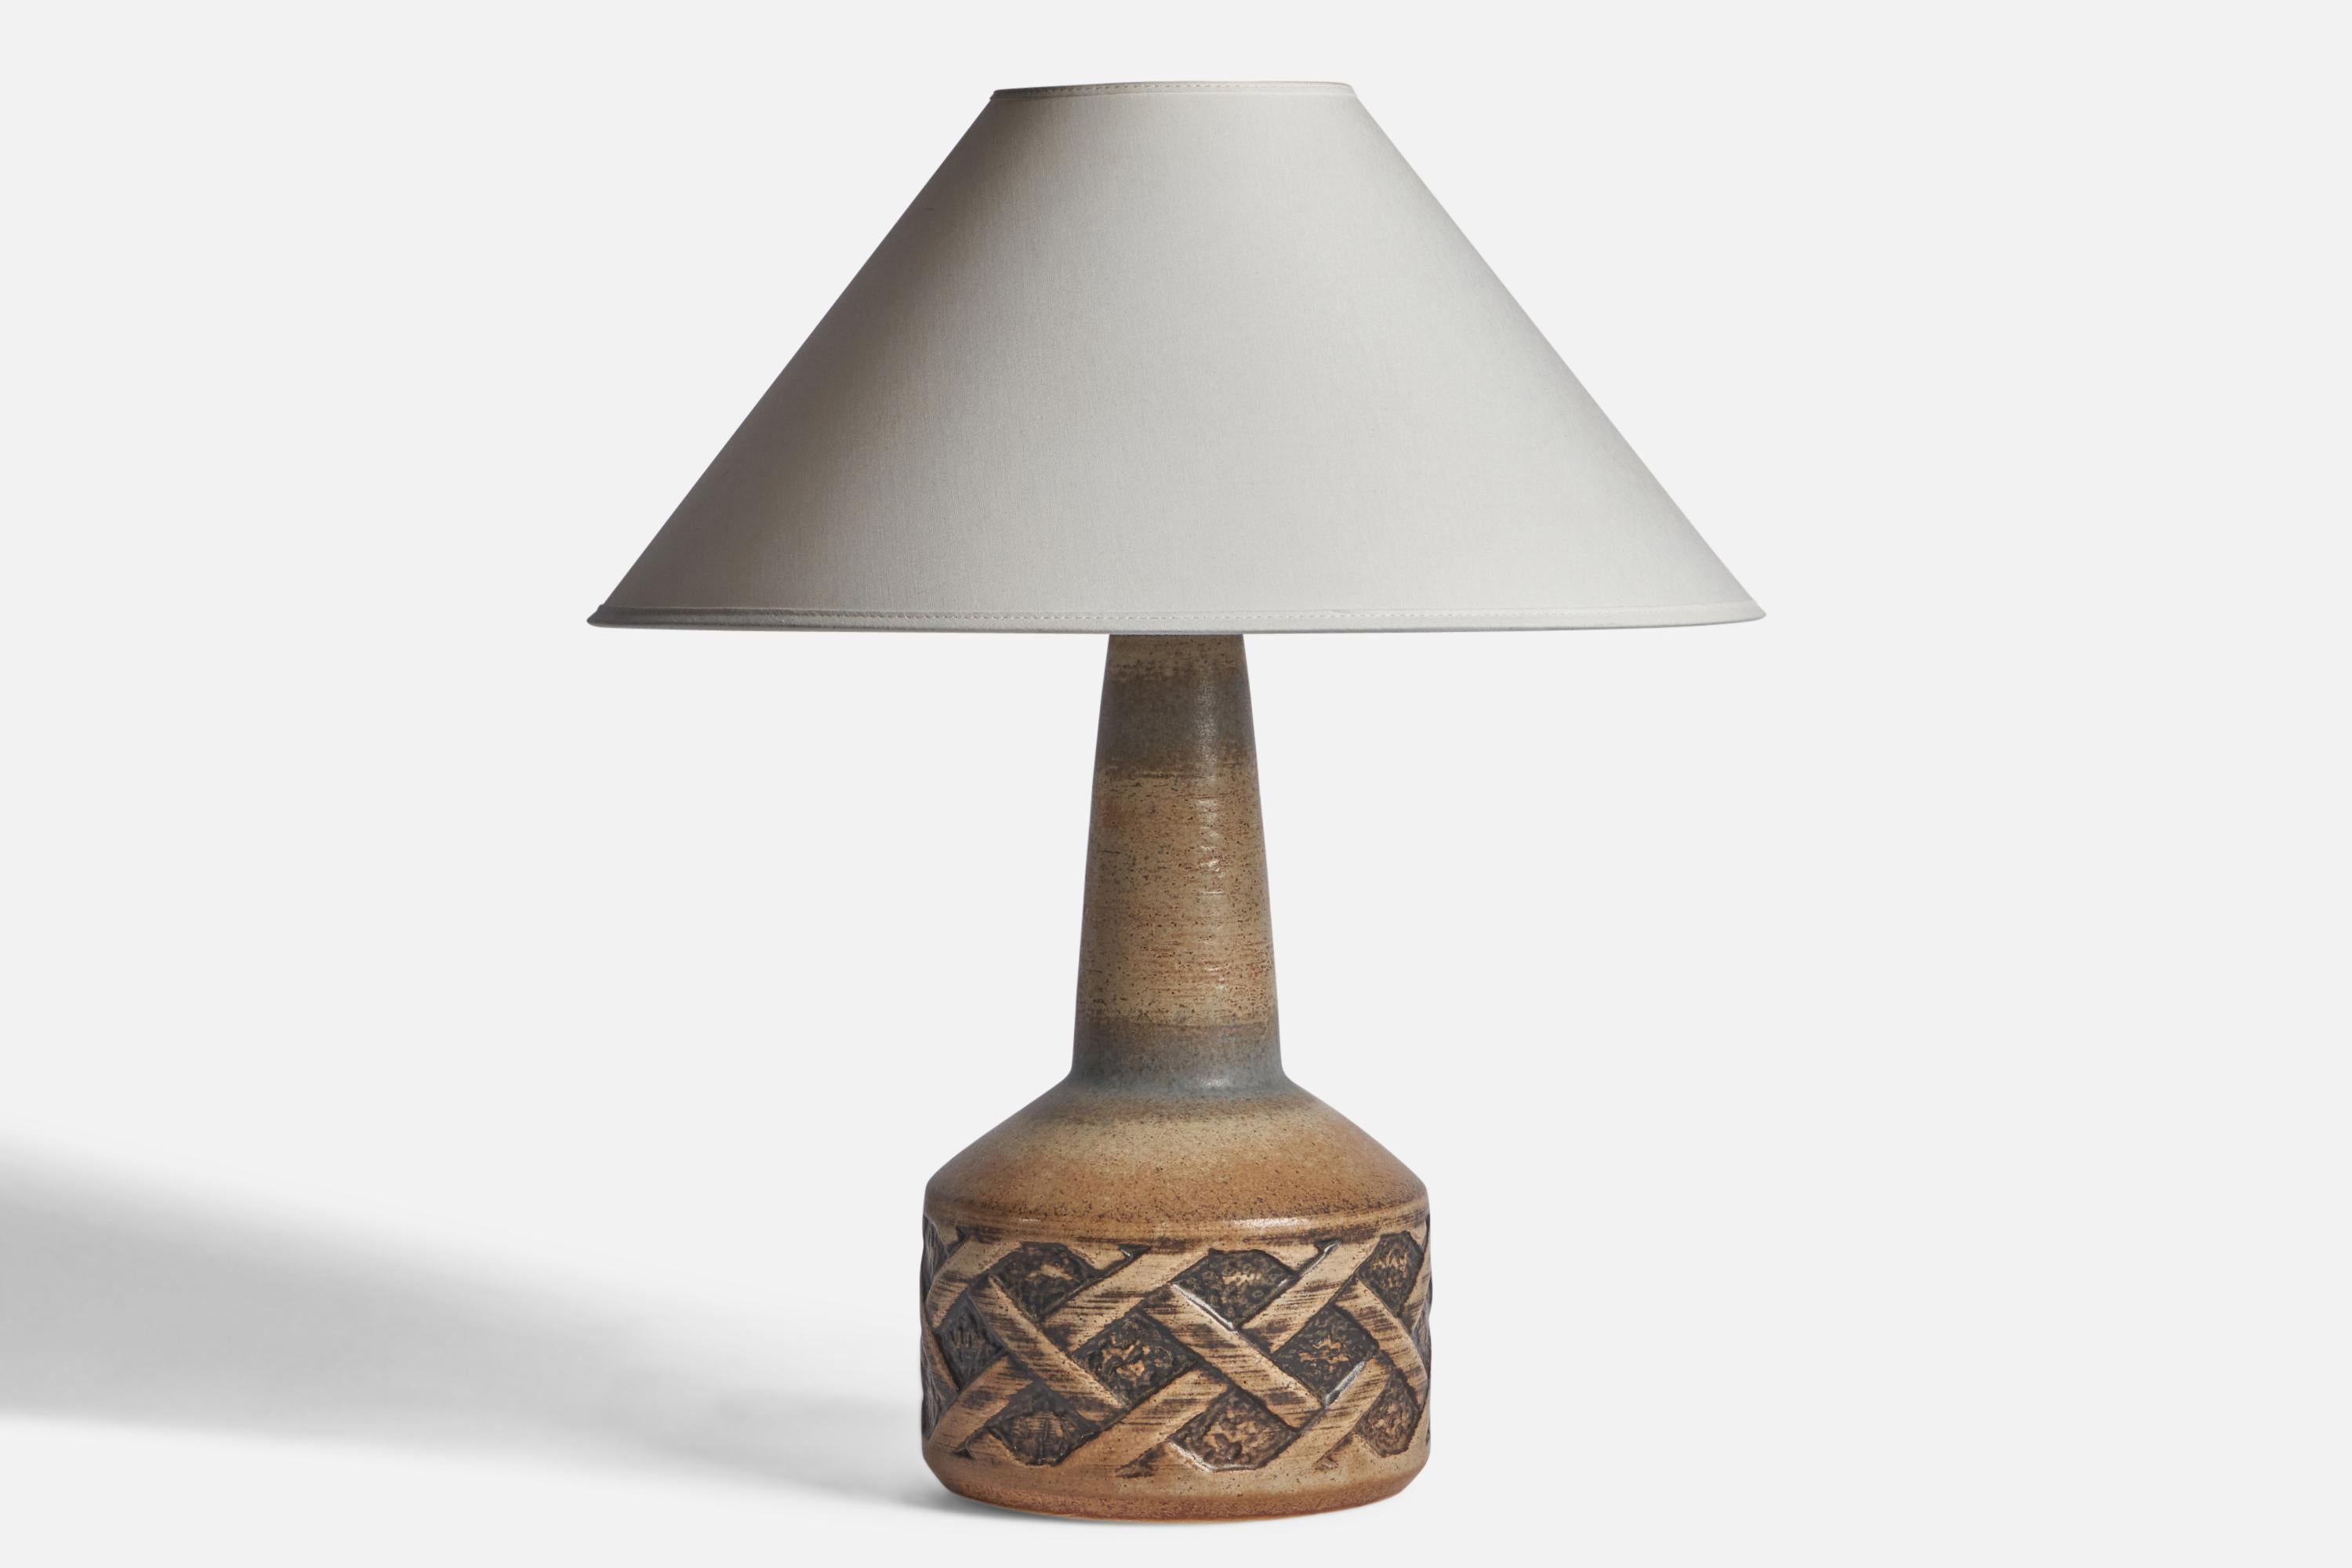 A grey and brown-glazed stoneware table lamp designed and produced by Søholm, Bornholm, Denmark, c. 1960s.

“1208-2” stamp on bottom
Dimensions of Lamp (inches): 15” H x 7.25” Diameter
Dimensions of Shade (inches): 4.5” Top Diameter x 16” Bottom